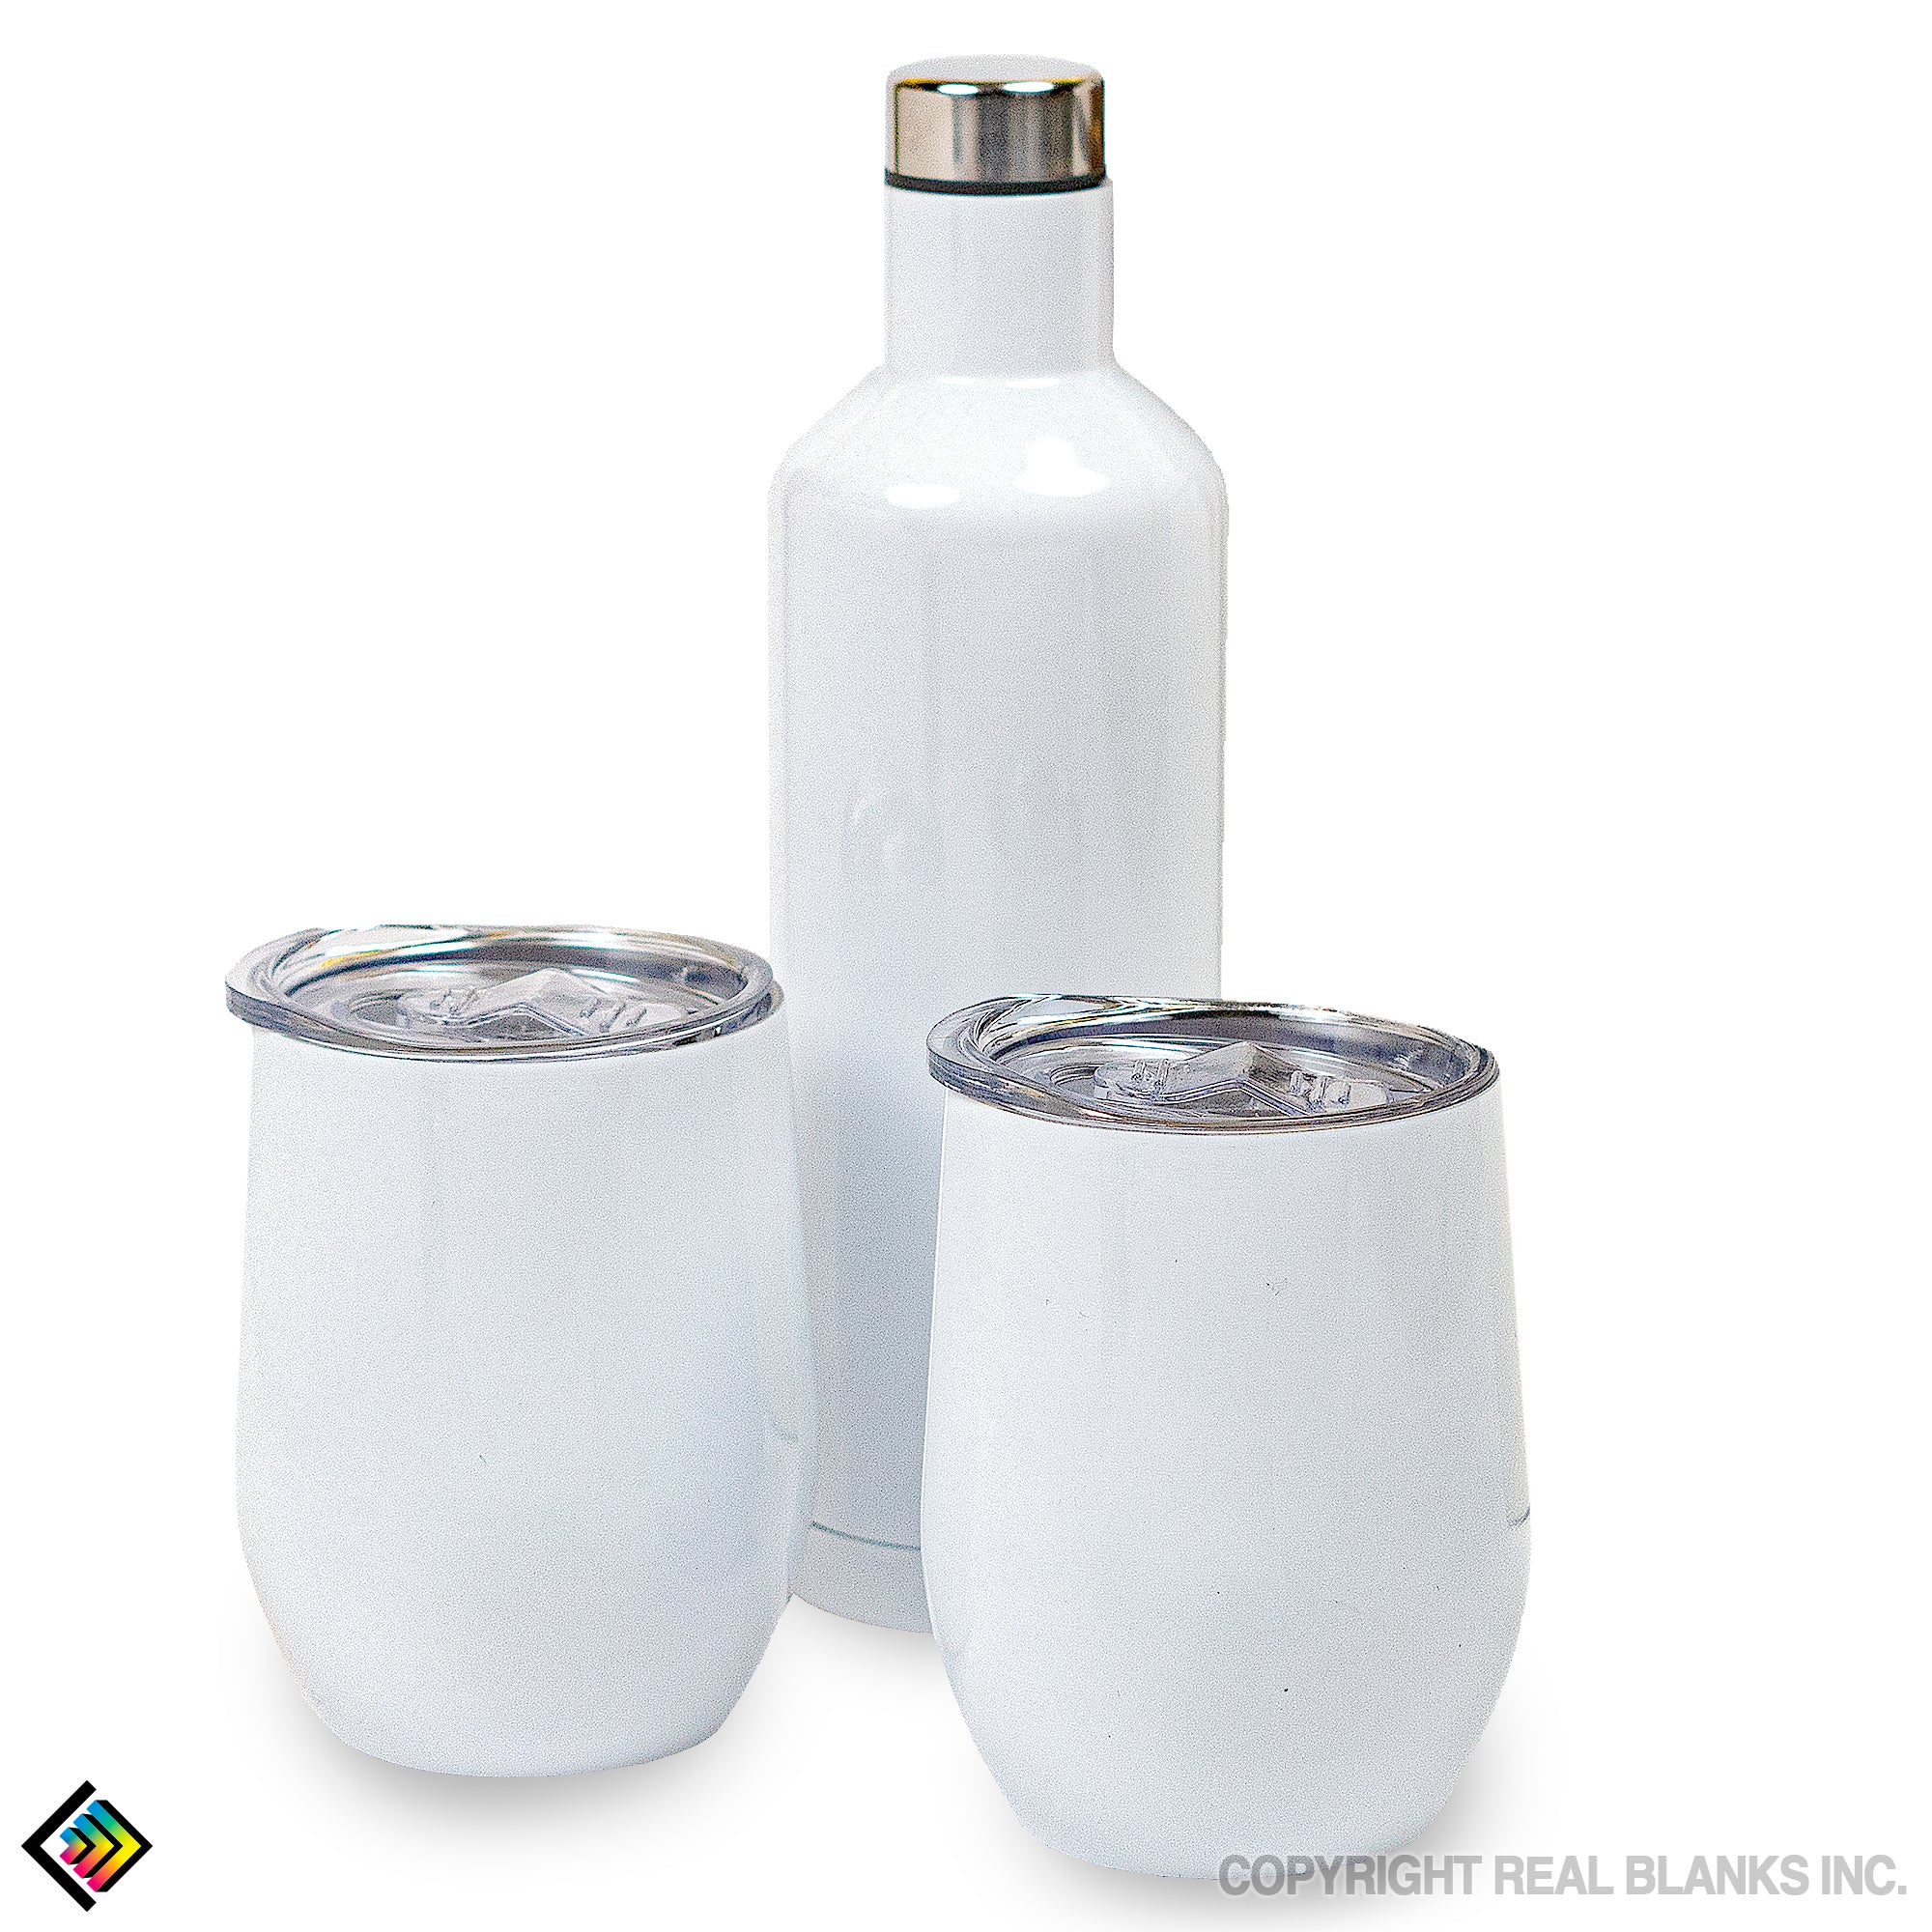 12oz/15oz SUBLIMATION WHITE STEEL WINE BOTTLE AND 2 GLASS WINE GIFT SET,wine  tumbler set,wine cups with lids